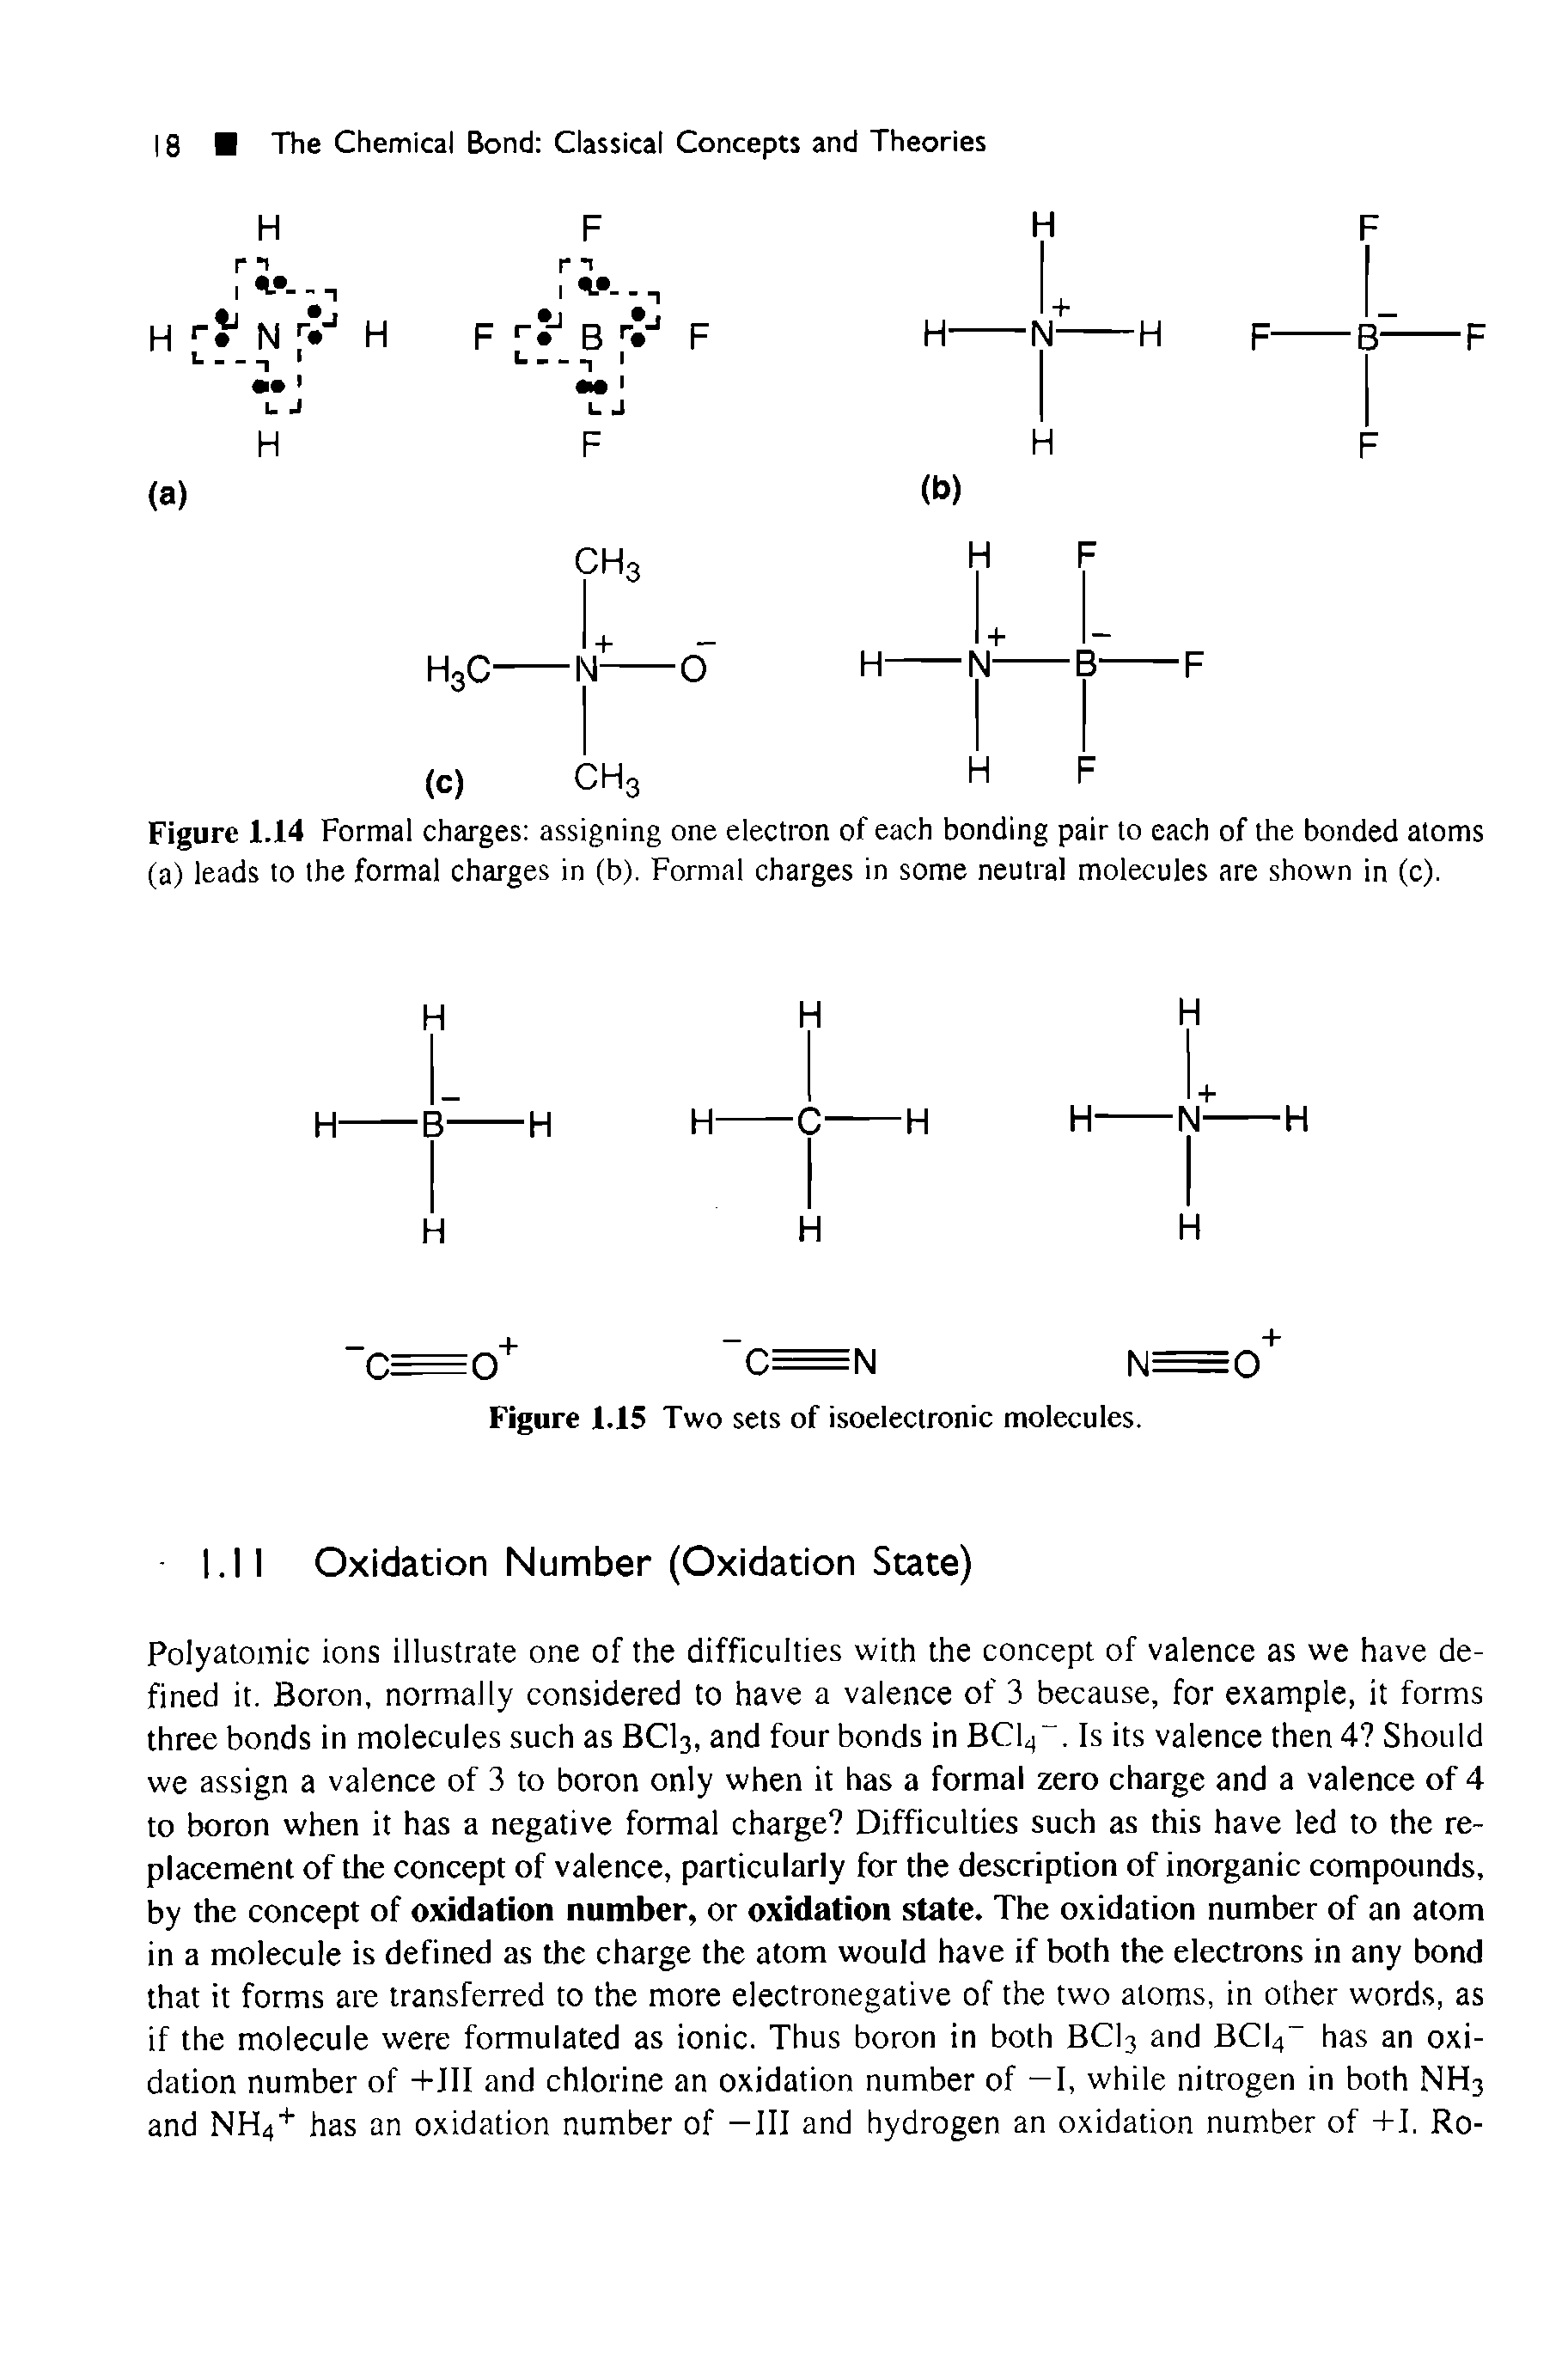 Figure 1.14 Formal charges assigning one electron of each bonding pair to each of the bonded atoms (a) leads to the formal charges in (b). Formal charges in some neutral molecules are shown in (c).